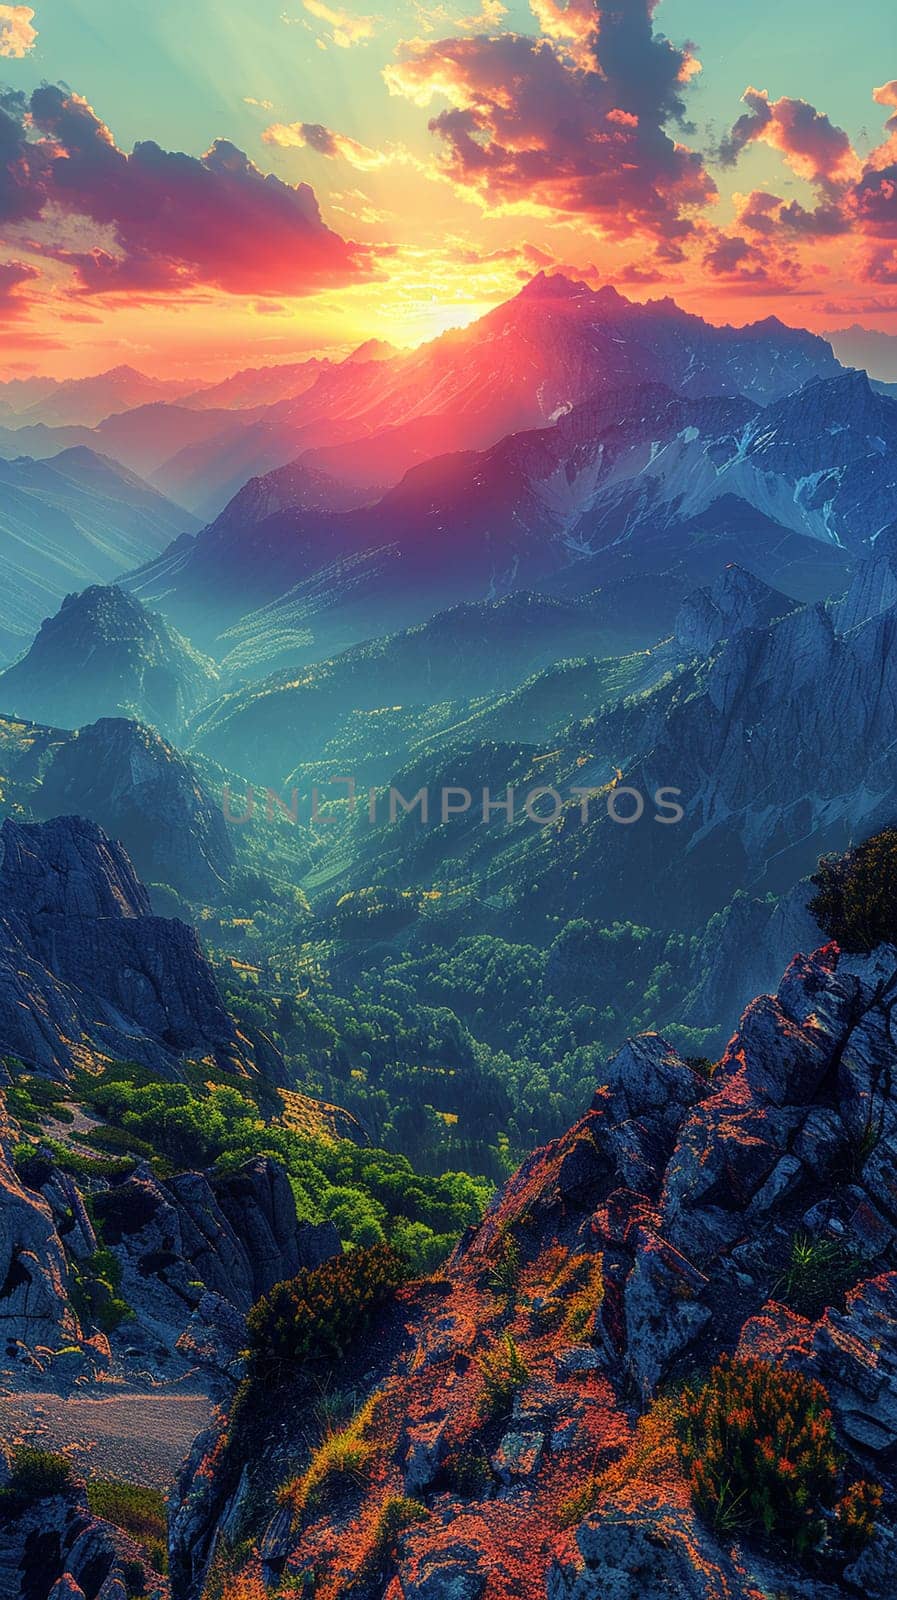 Layers of mountain ranges at sunset, offering a serene and majestic landscape.